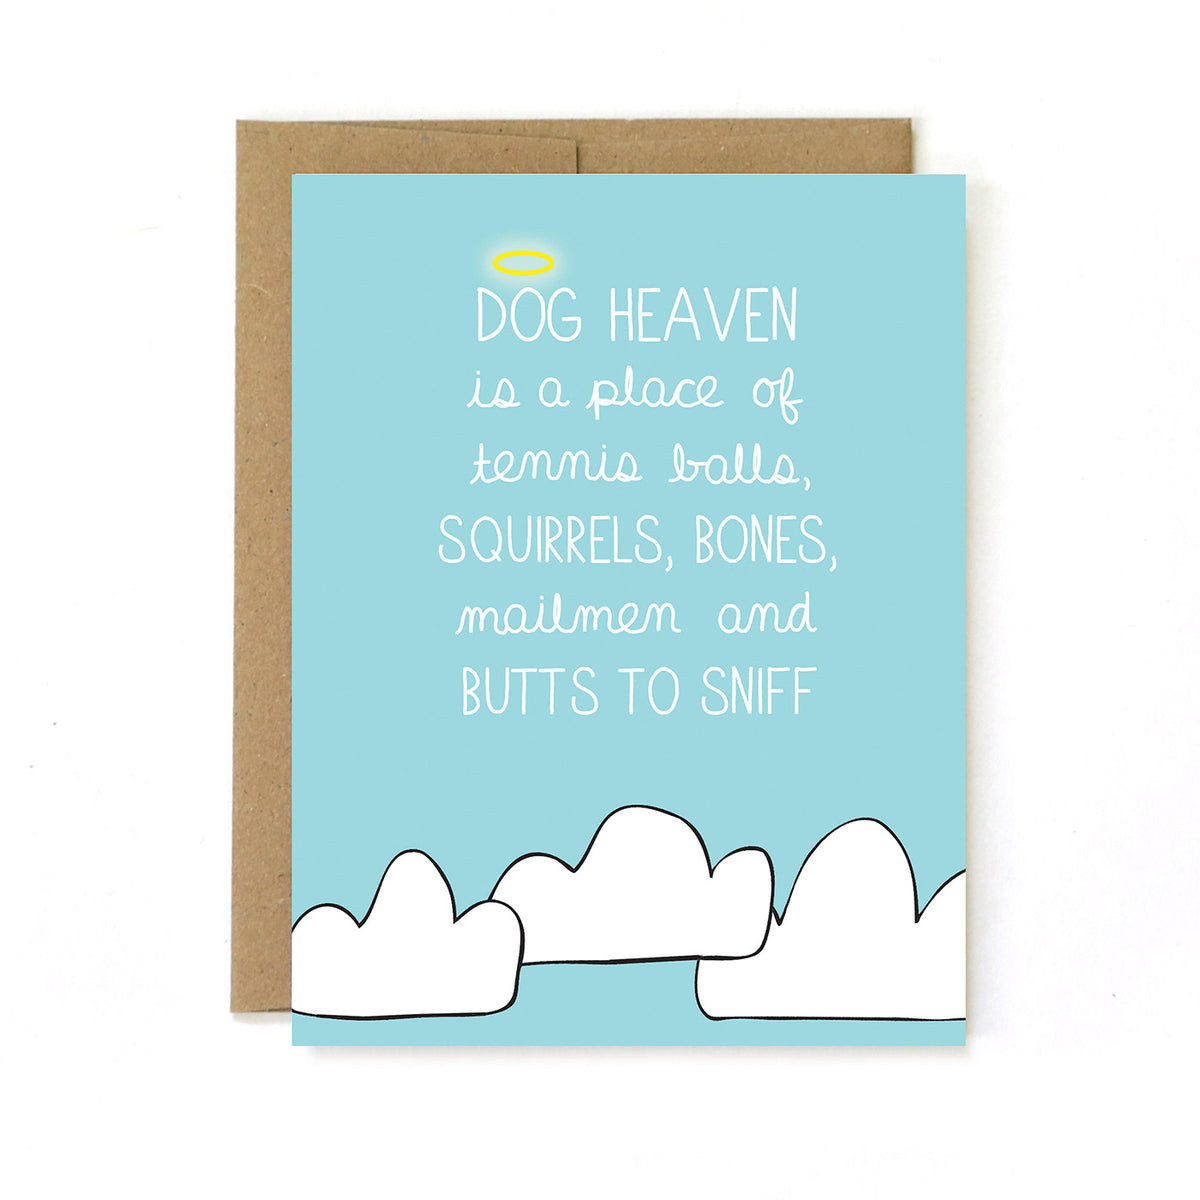 Dog Heaven is a place of tennis balls, squirrels, bones, mailmen, and butts to sniff illustrated pet loss card